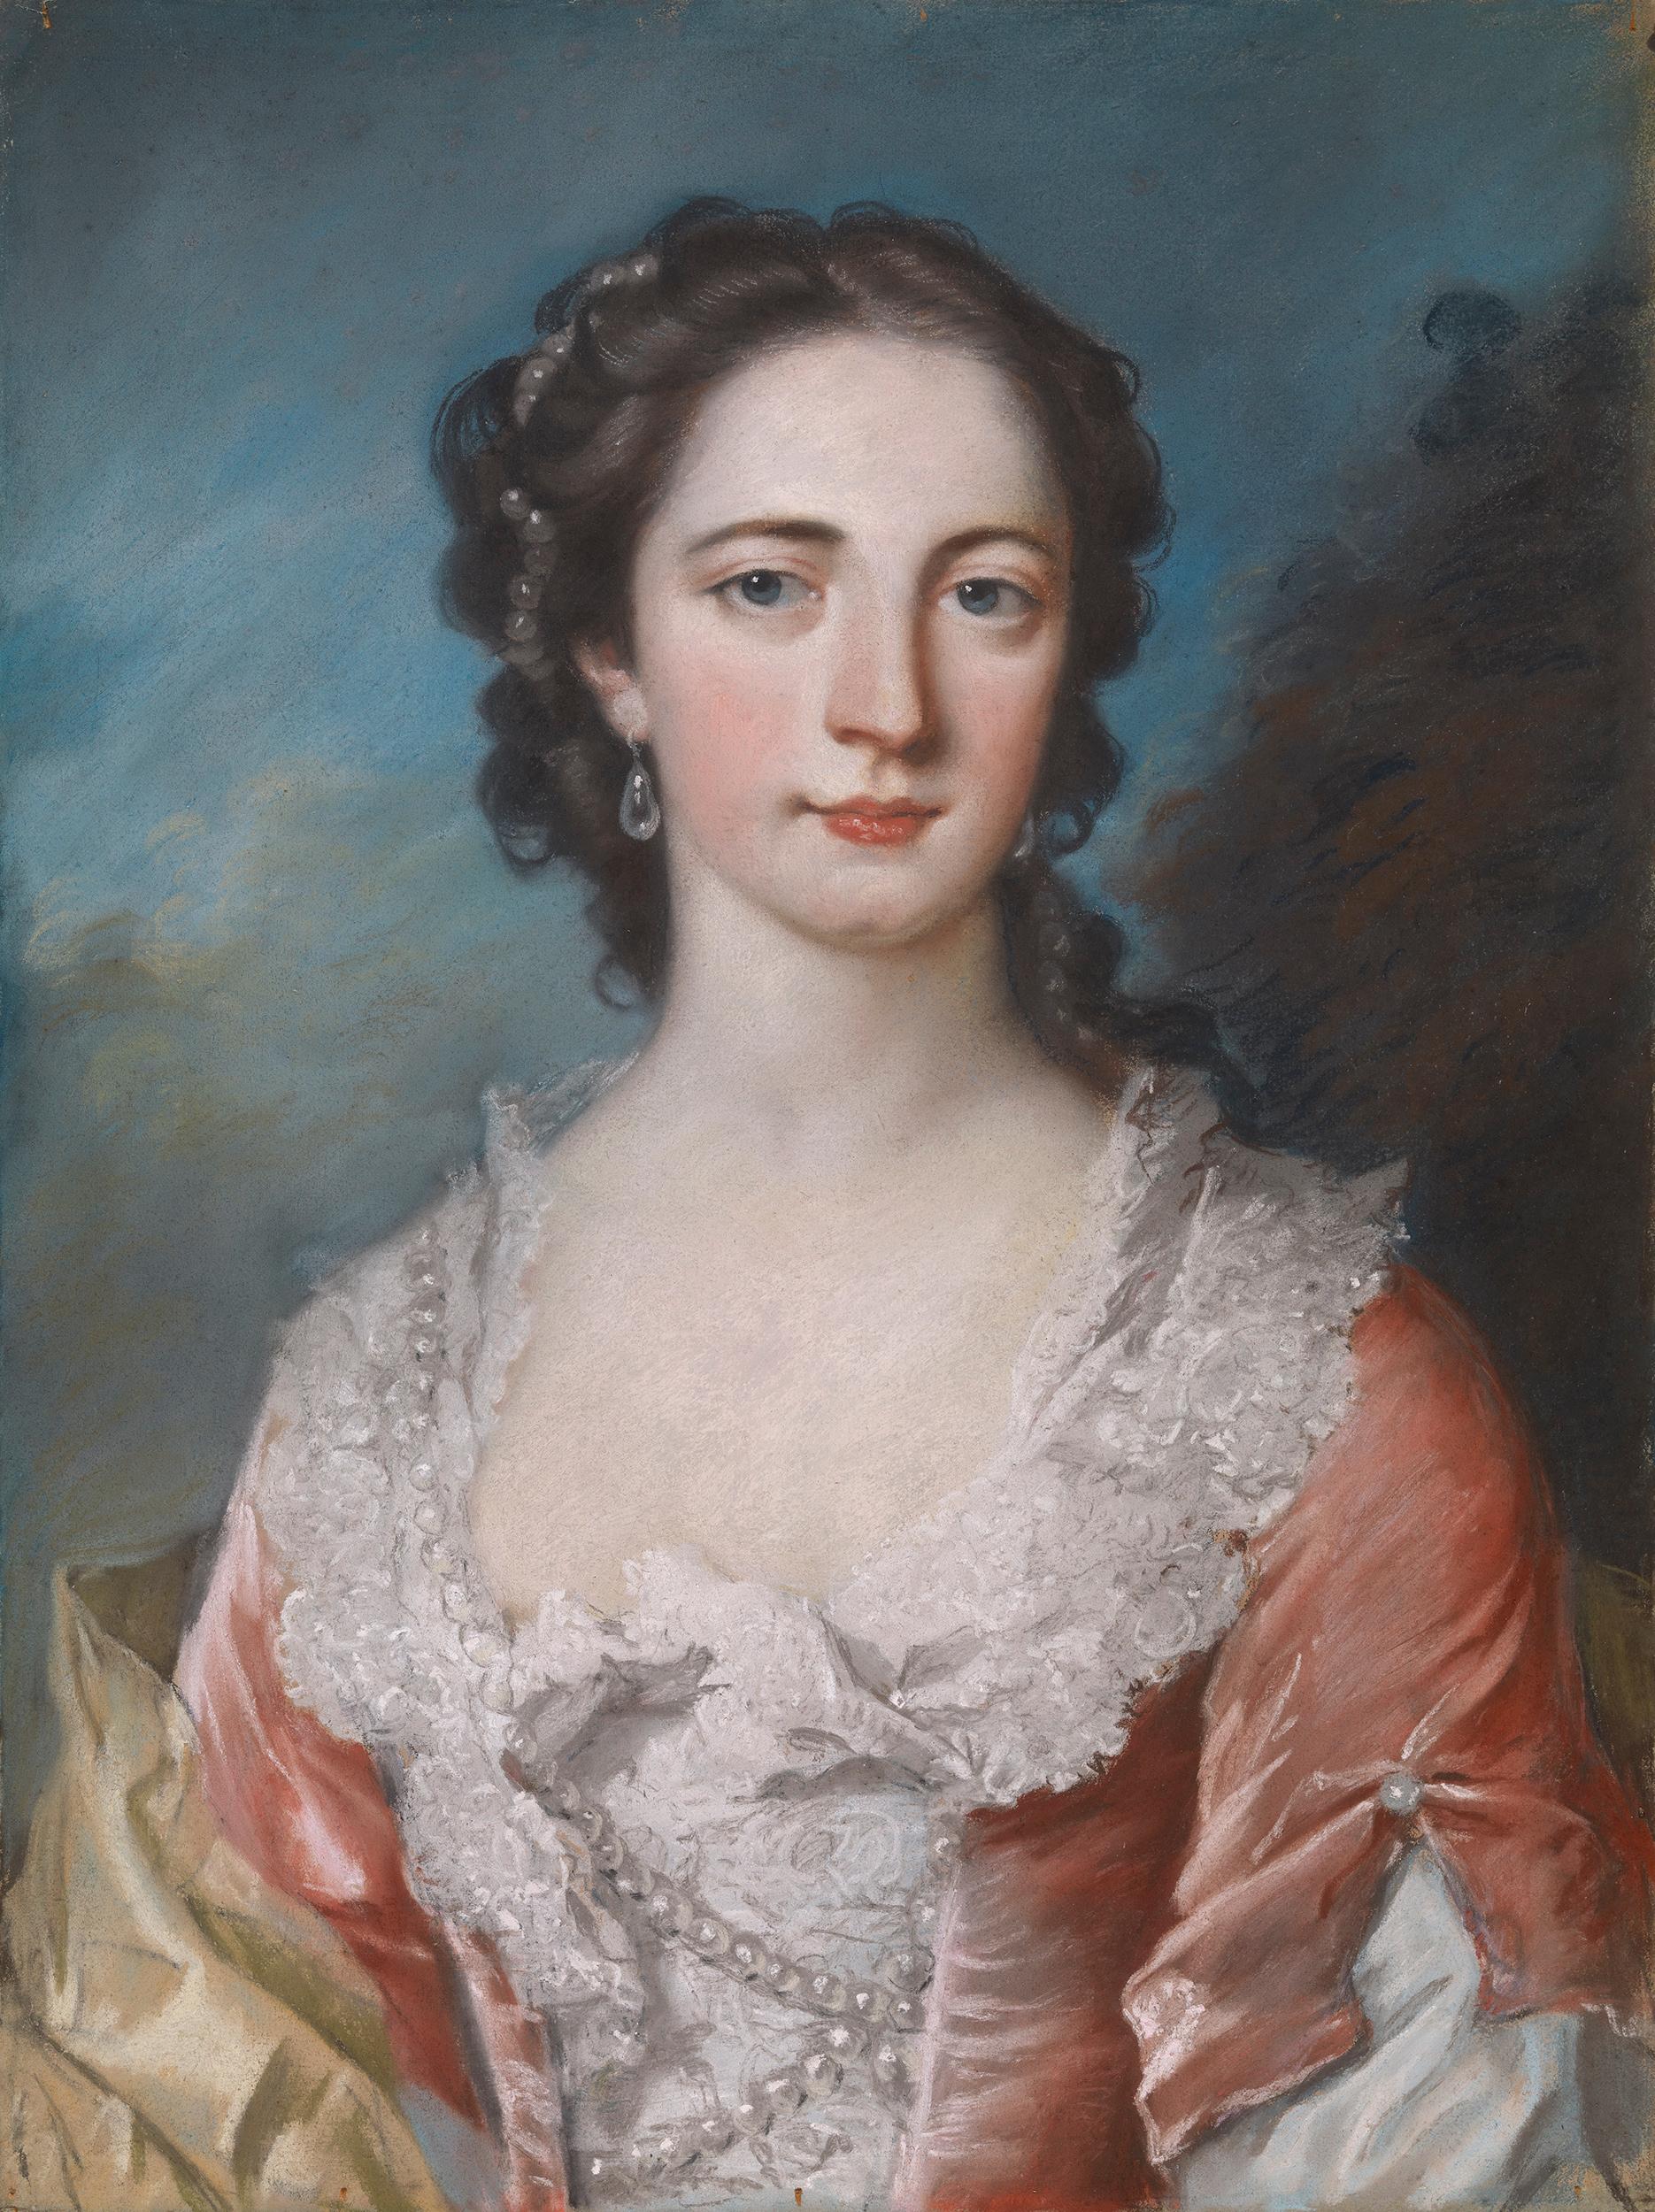 18th century pastel portrait of Lady Norris - Art by William Hoare of Bath